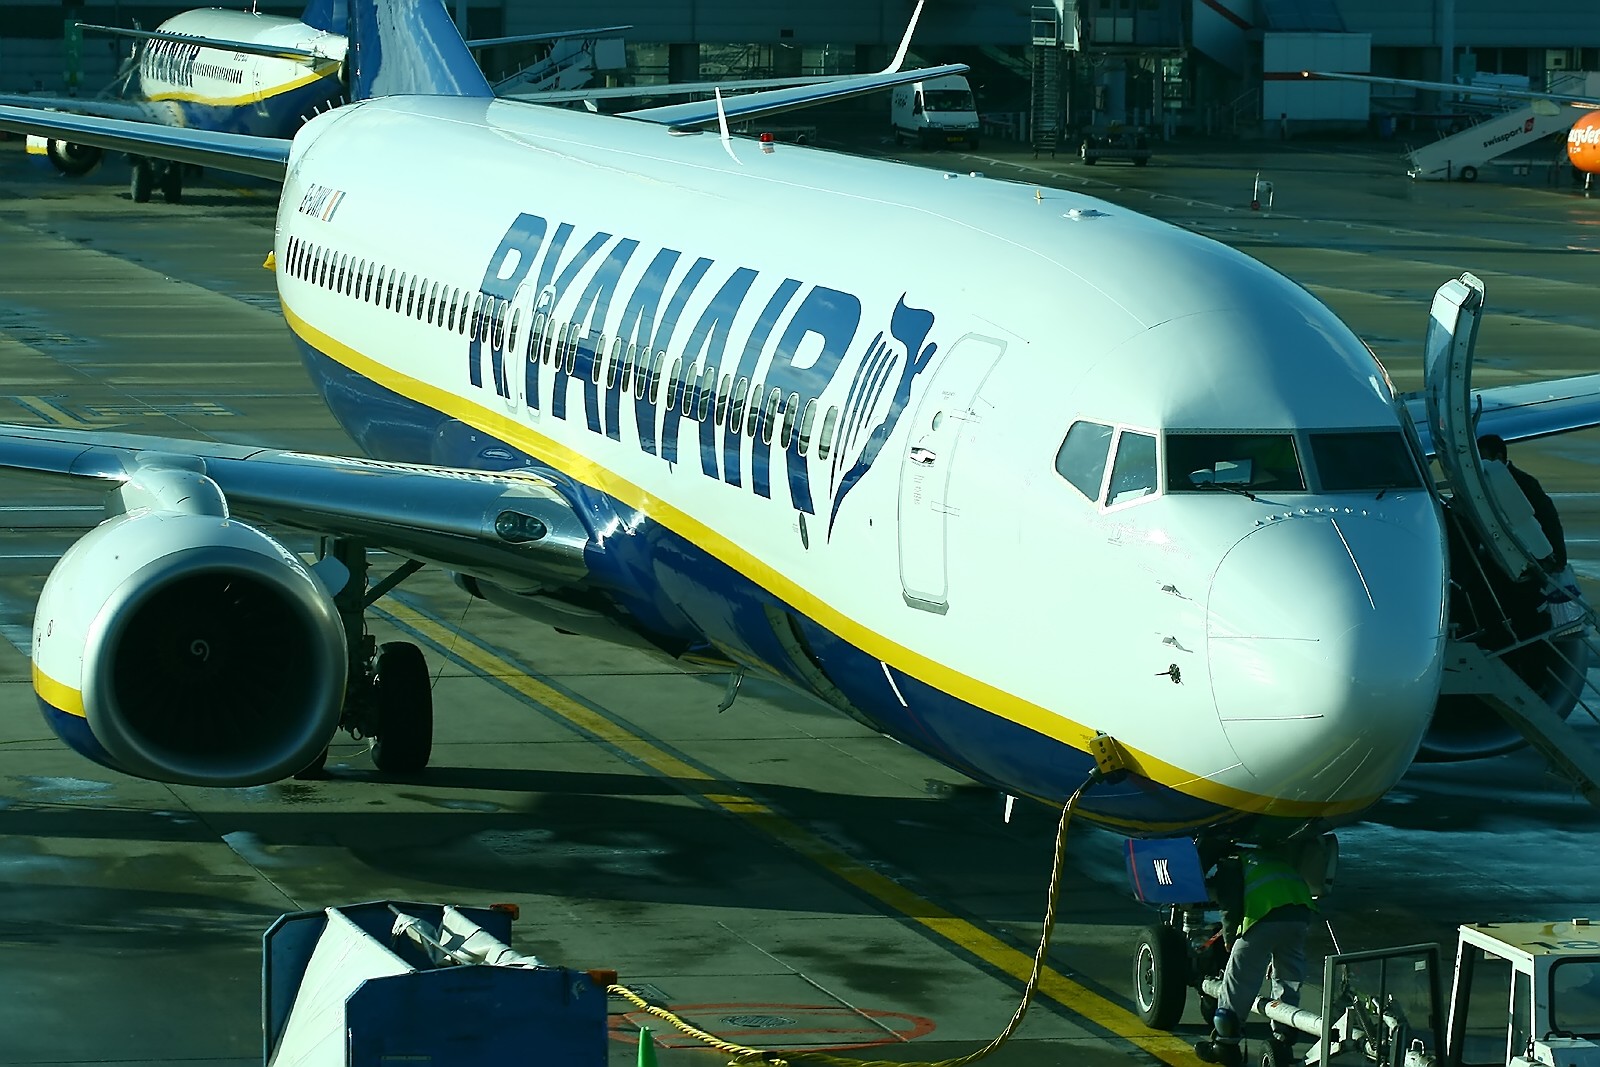 Ryanair To Lower Checked Bag Fees (& Raise Size Allowance)To Eliminate Boarding Delays     –      Non-Priority Customers Must Put 2nd (Bigger) Bag In Hold (Free Of Charge) From November